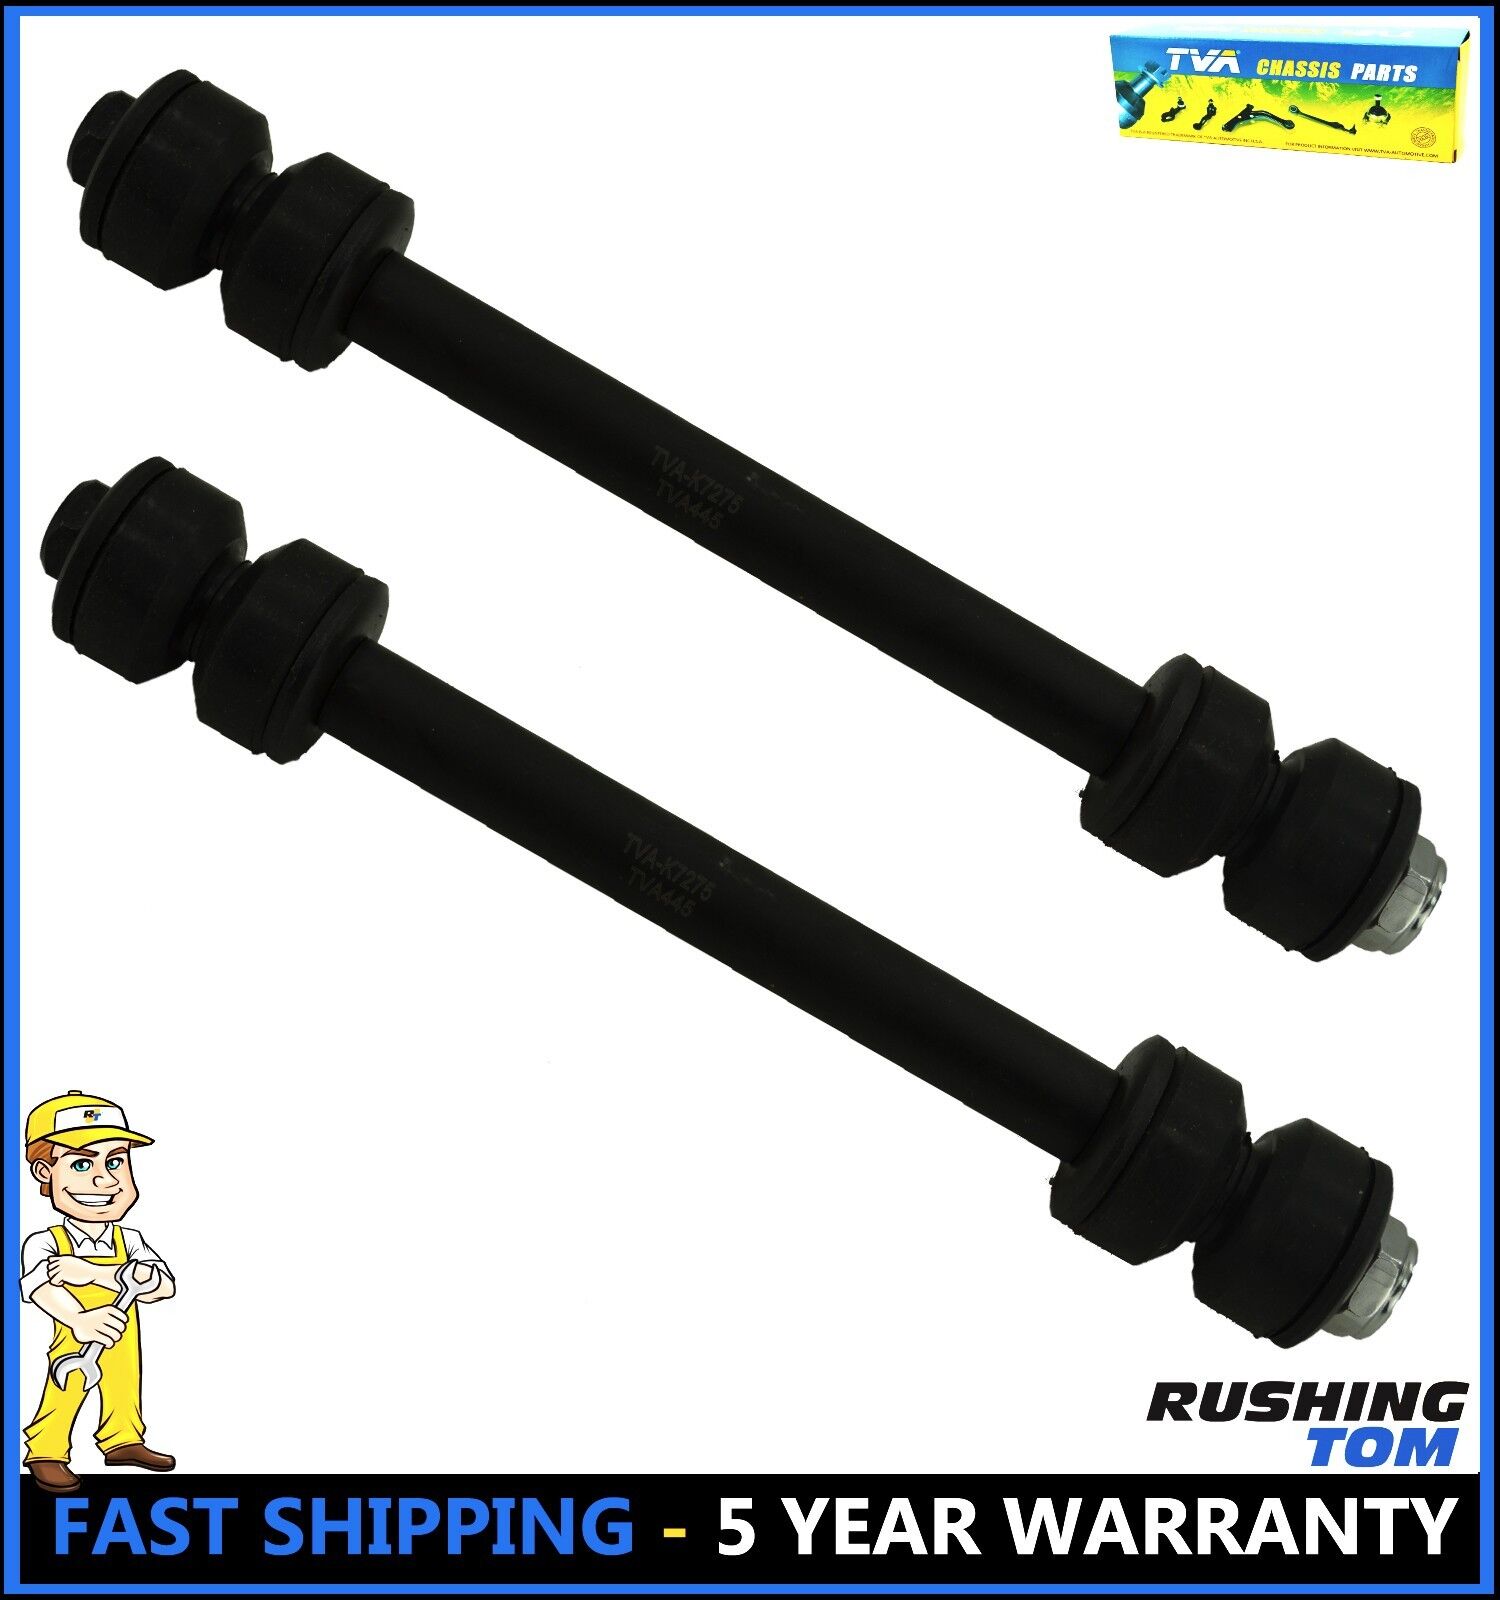 2 Front Stabilizer Sway Bar Link for Ford Explorer Ranger Mountaineer B2500 RAM